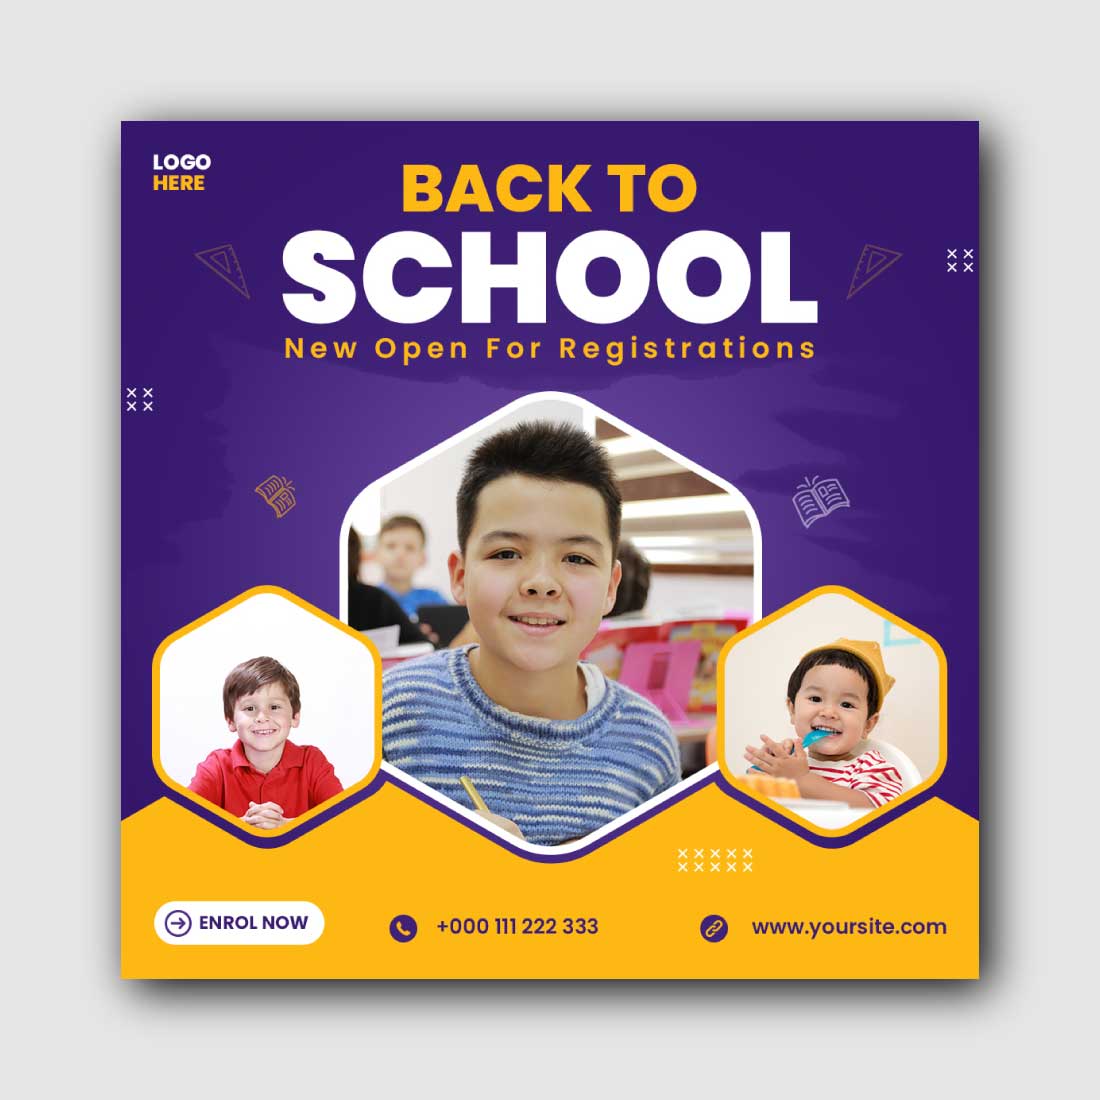 School admission Social Media Post Template cover image.